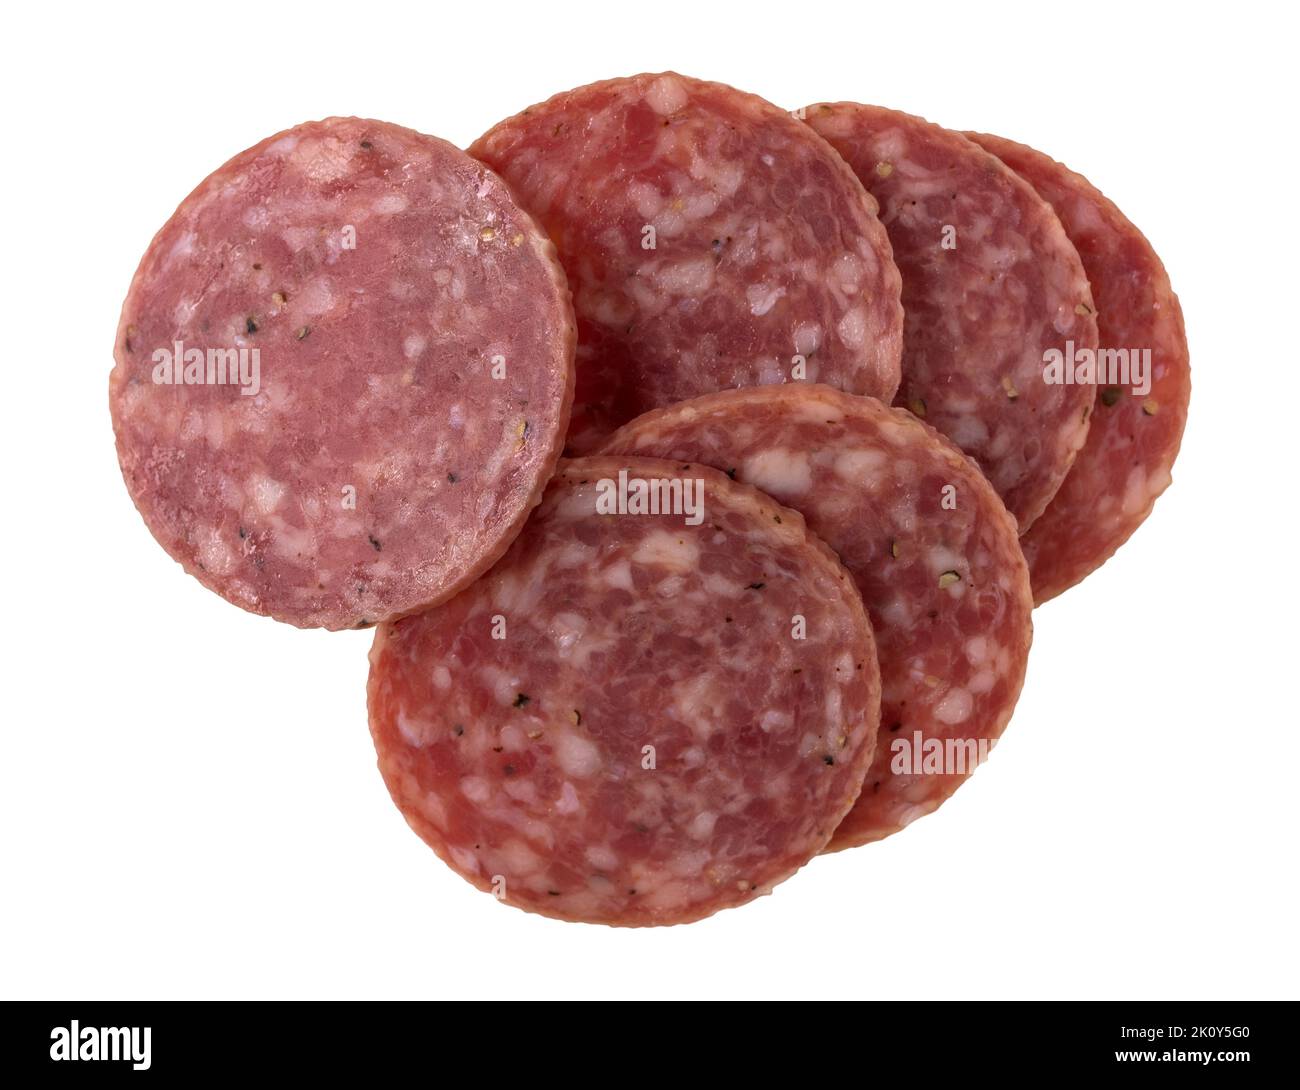 Top view of several slices of dry salami isolated on a white background. Stock Photo